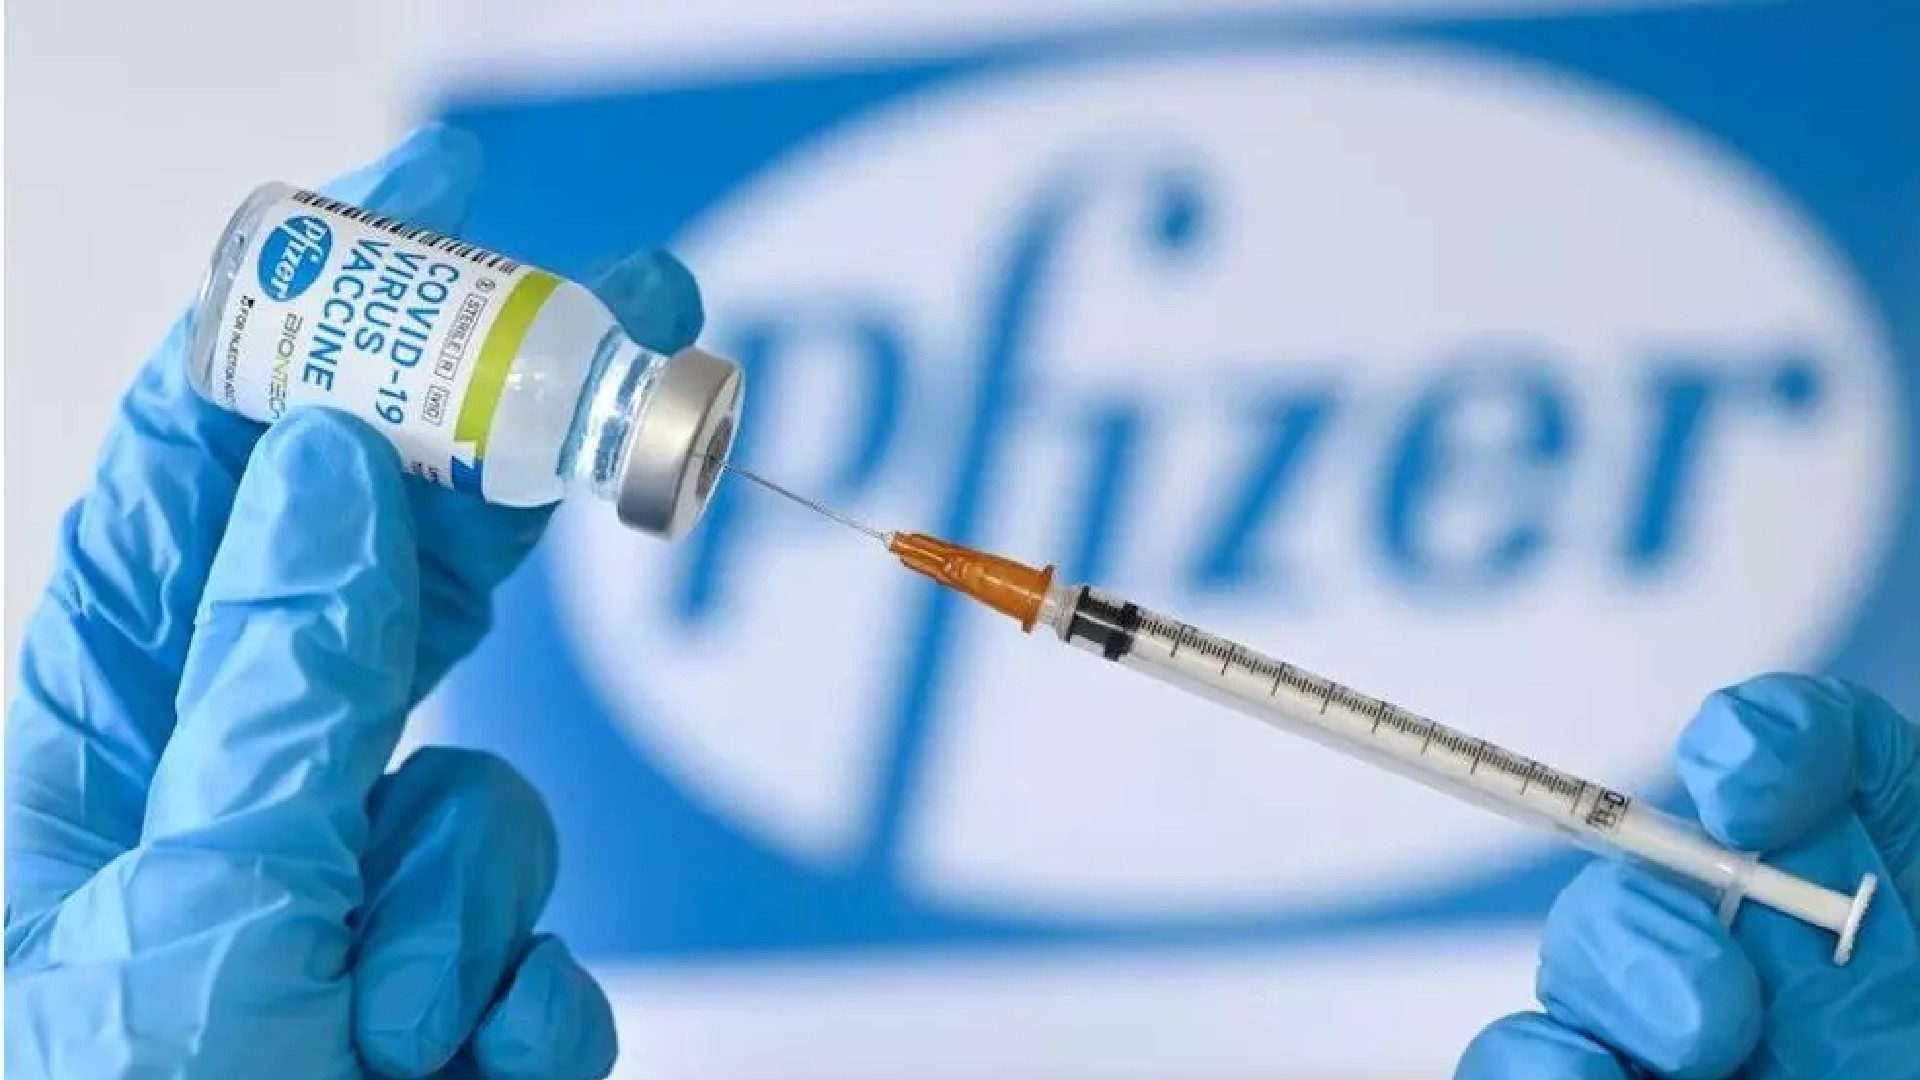 UAE Approves Pfizer Vaccine For 12-15 Year Olds